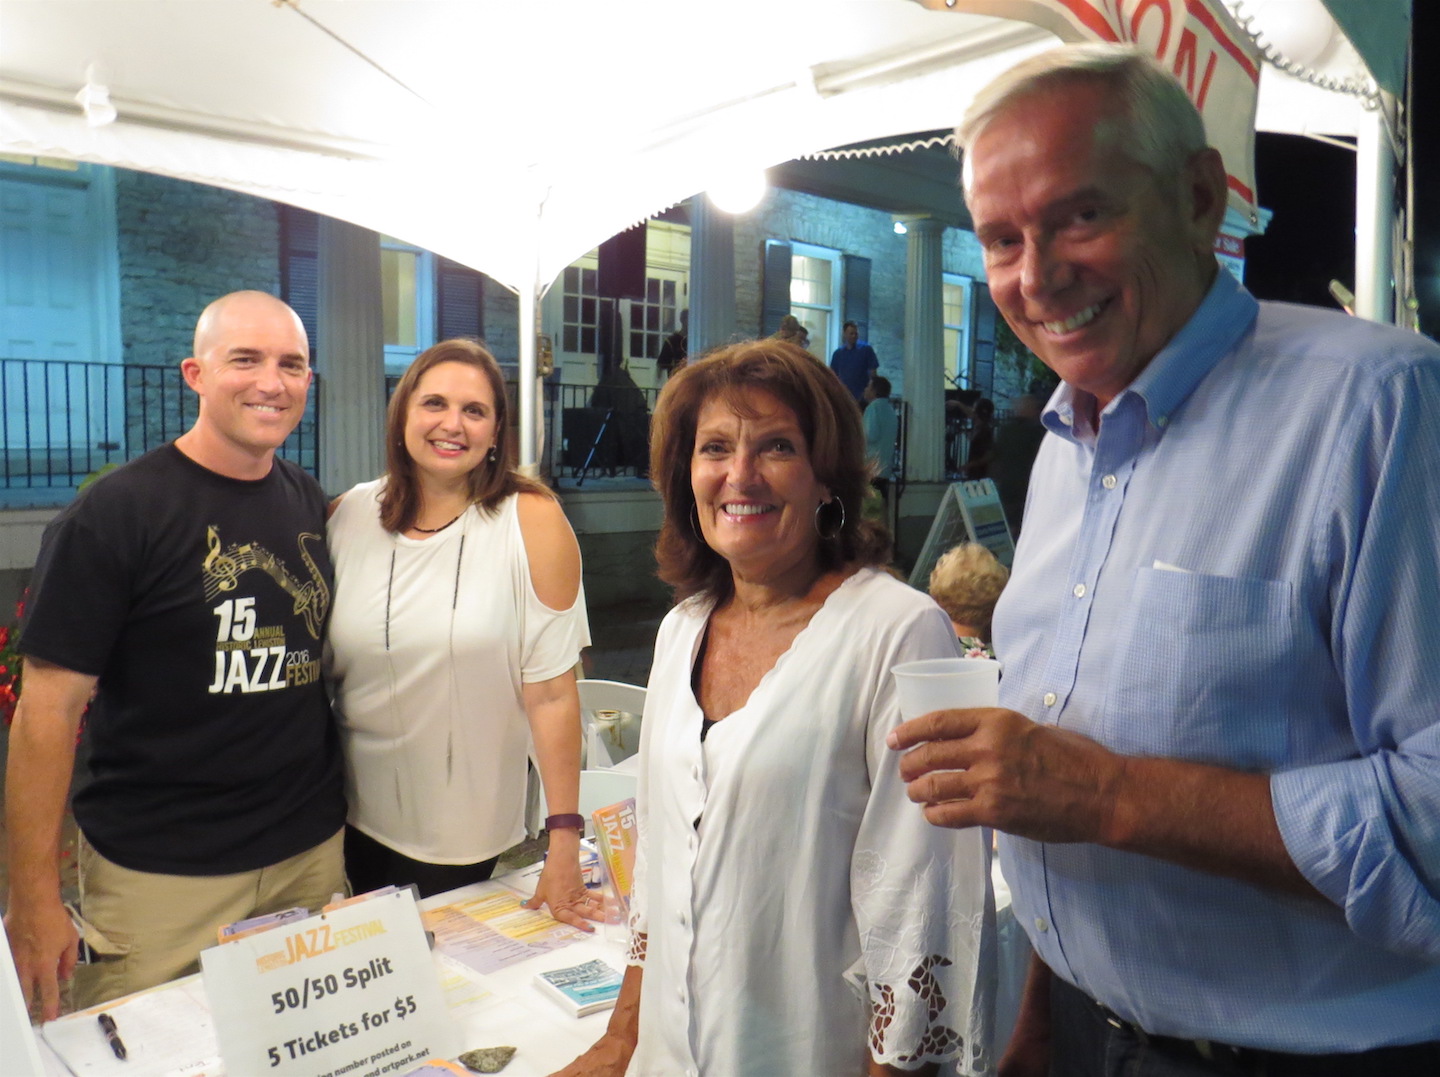 Volunteers Marty and Jennifer Pauly, left, with Maureen Kellick and Neil Nolf.